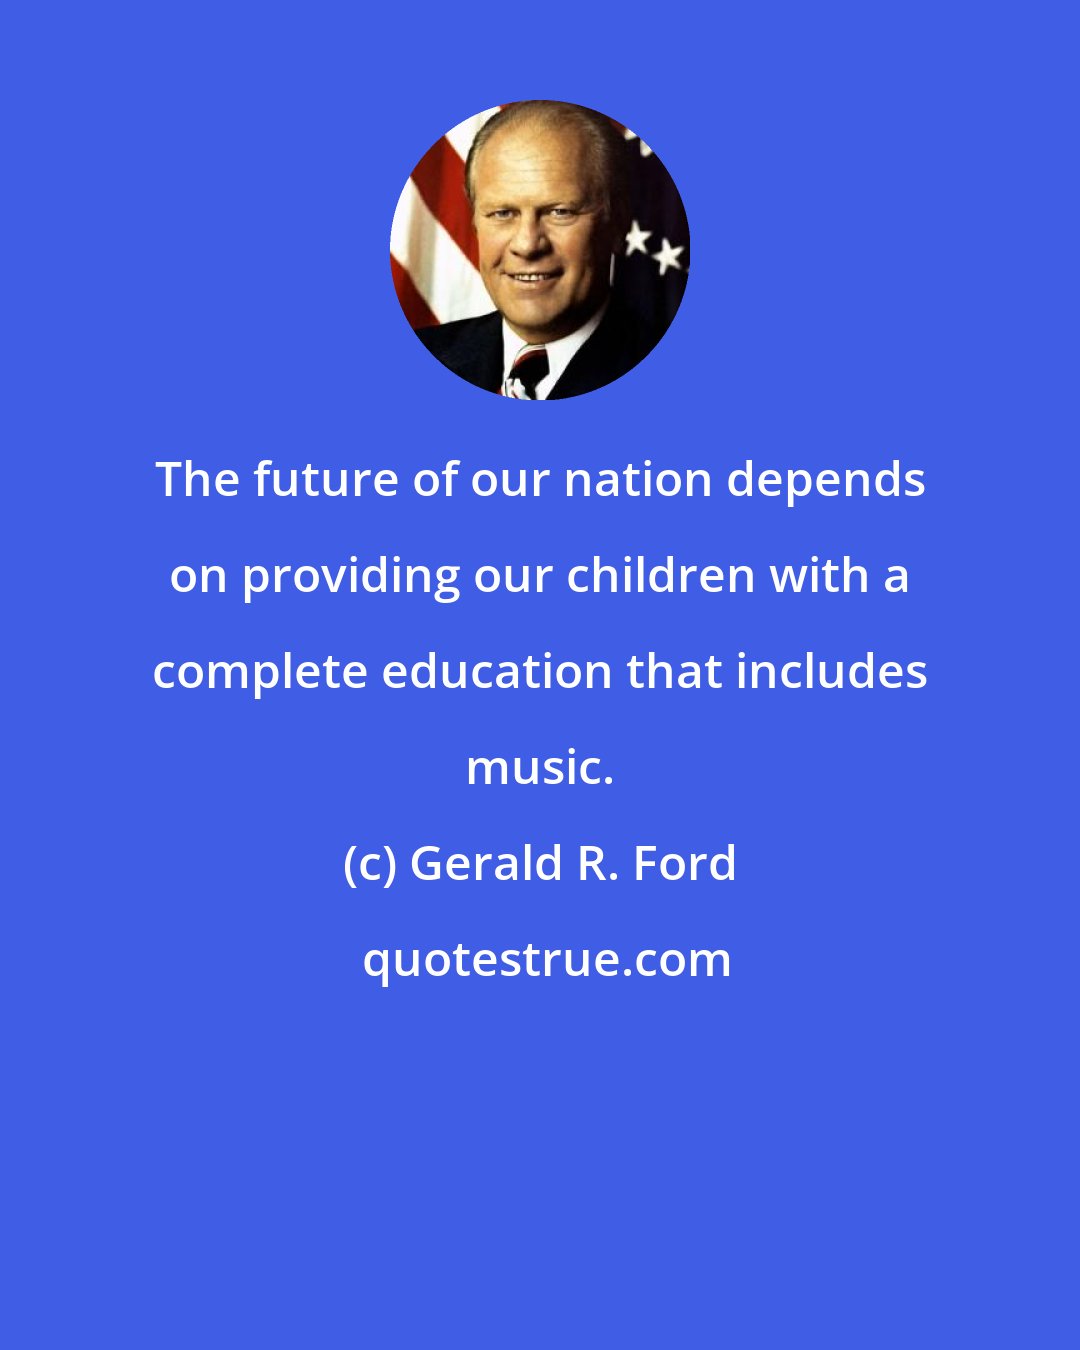 Gerald R. Ford: The future of our nation depends on providing our children with a complete education that includes music.